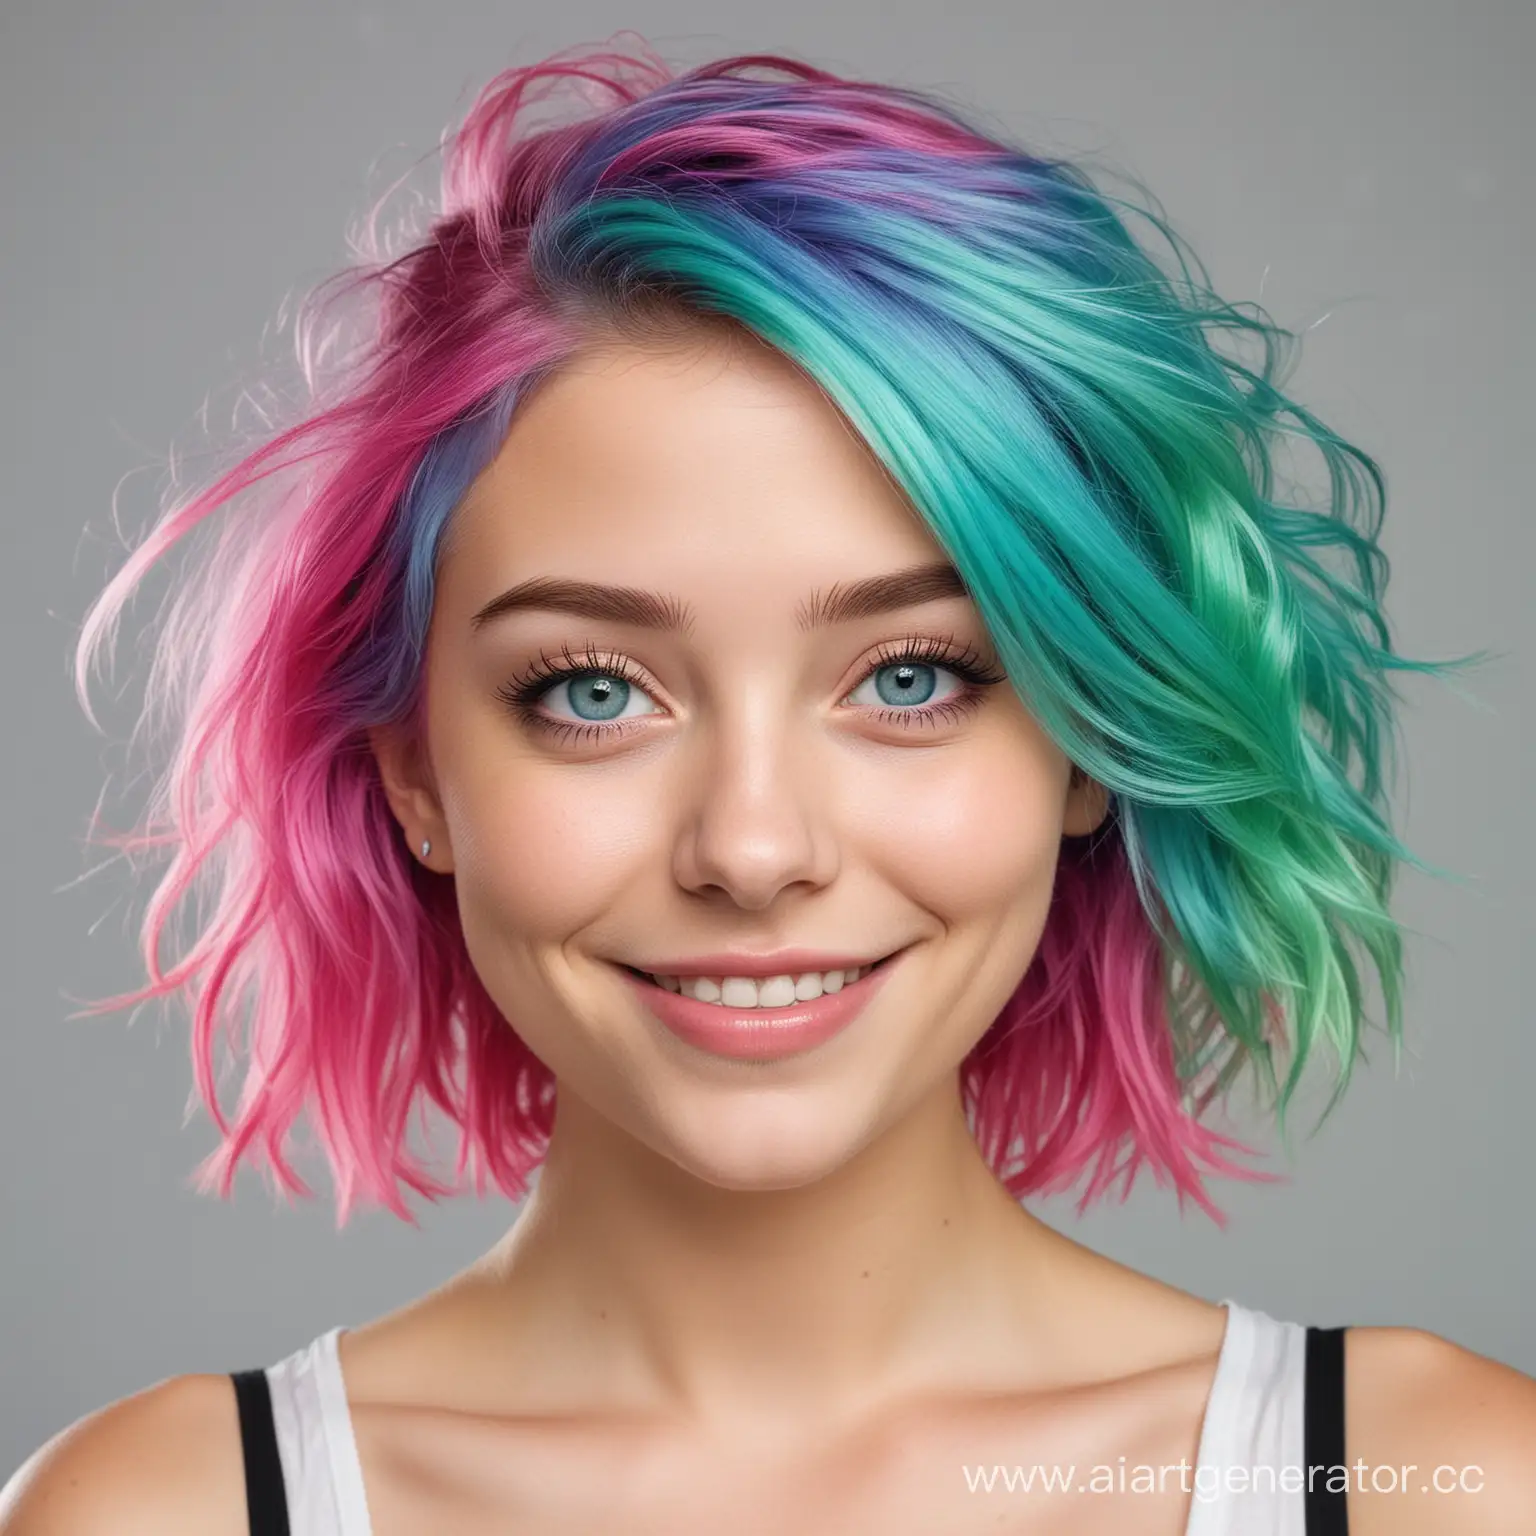 Cheerful-Girl-with-Vibrant-PinkGreen-Hair-and-Blue-Eyes